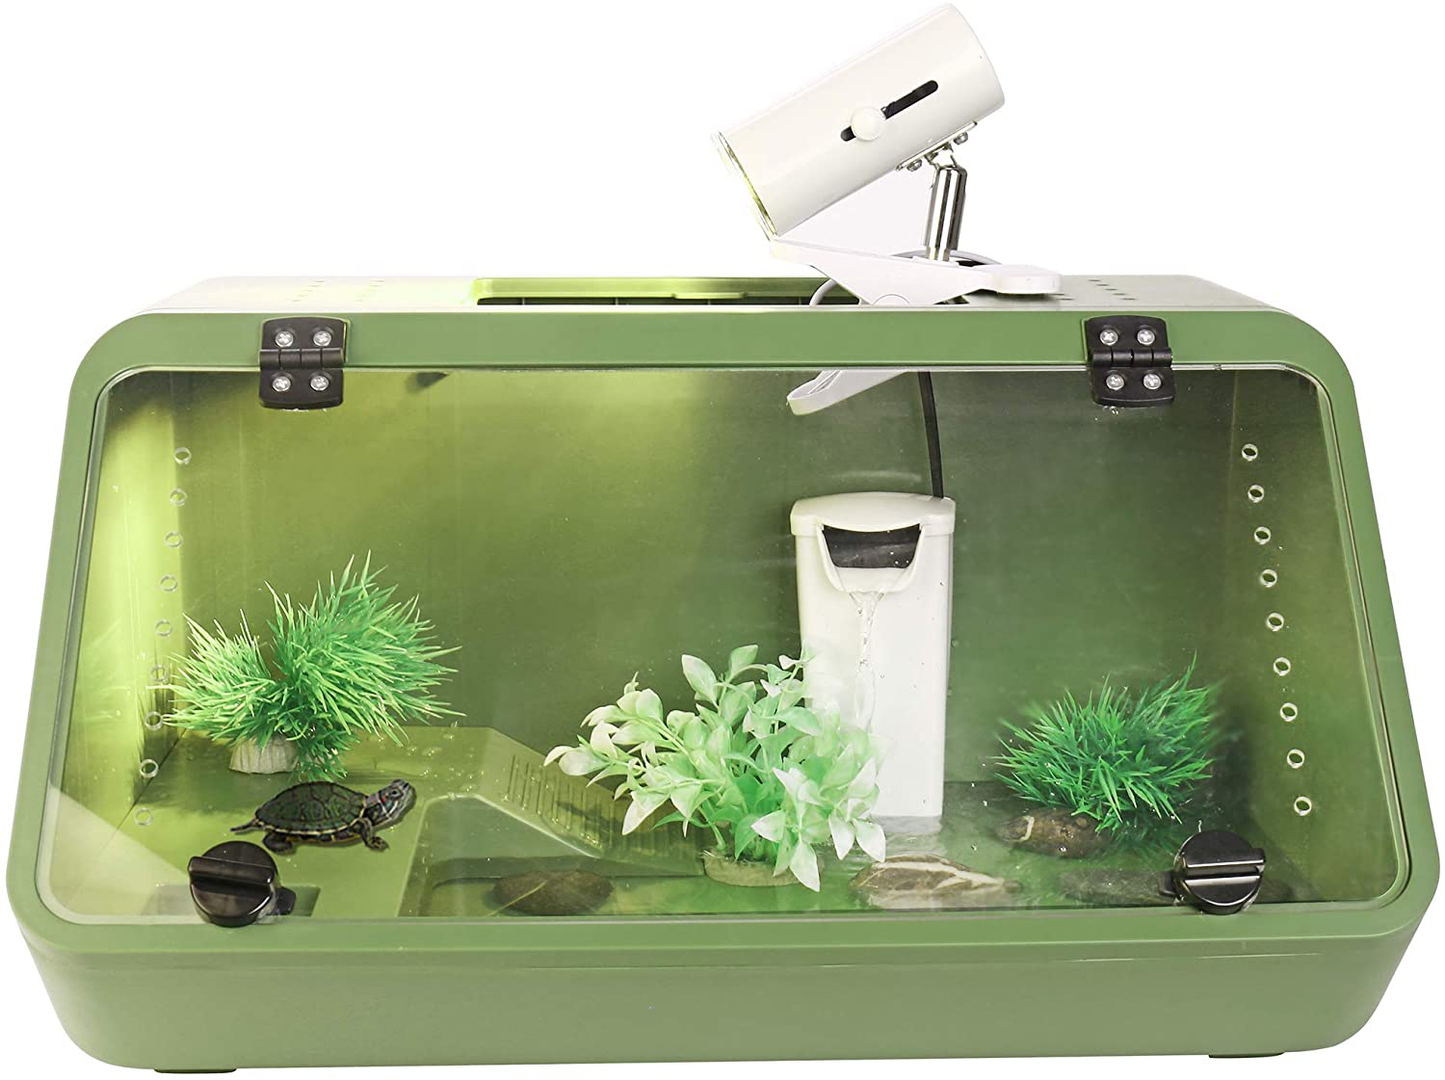 Large Reptile Tank – an Aquarium with a See-Through, Easy Access Front Panel Door | Habitat for Small Reptiles like Young Bearded Dragons, Lizards, Small Snakes and More |19''X10''X10'' with Food Tray Animals & Pet Supplies > Pet Supplies > Reptile & Amphibian Supplies > Reptile & Amphibian Habitat Accessories CALPALMY Green  